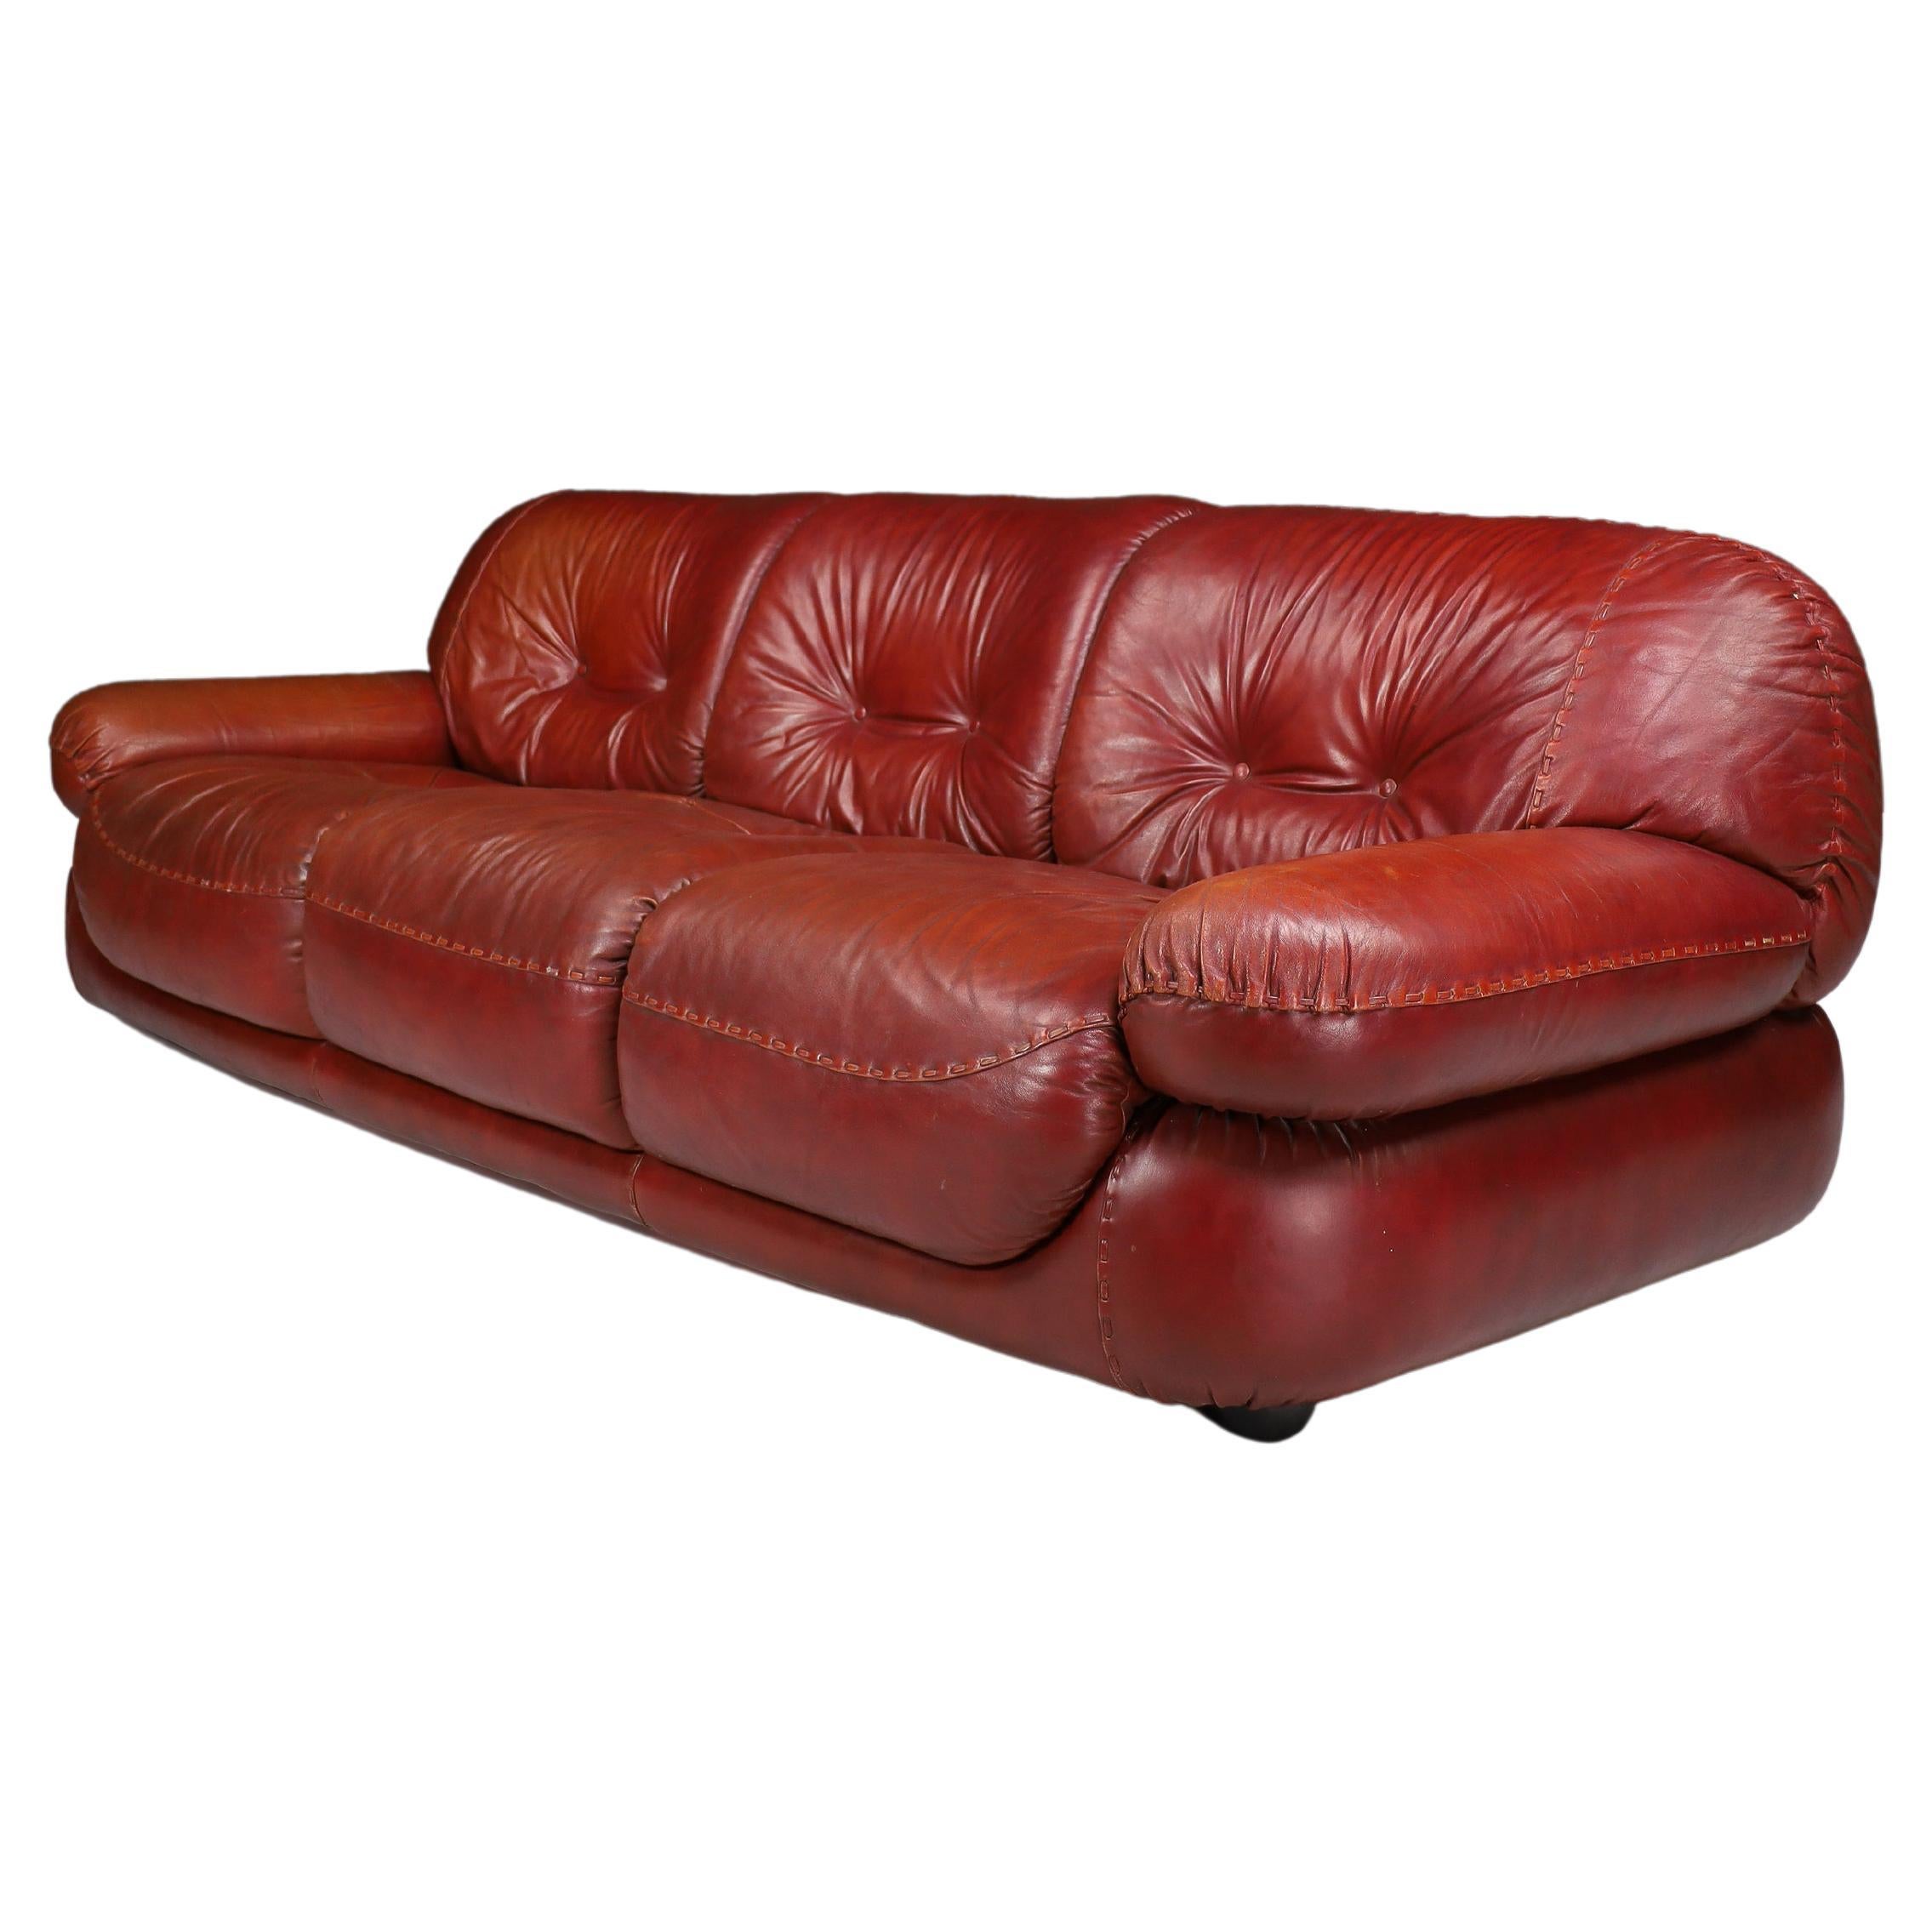 Large Lounge Sofa in Bordeaux Leather by Sapporo for Mobil Girgi, Italy, 1970 For Sale